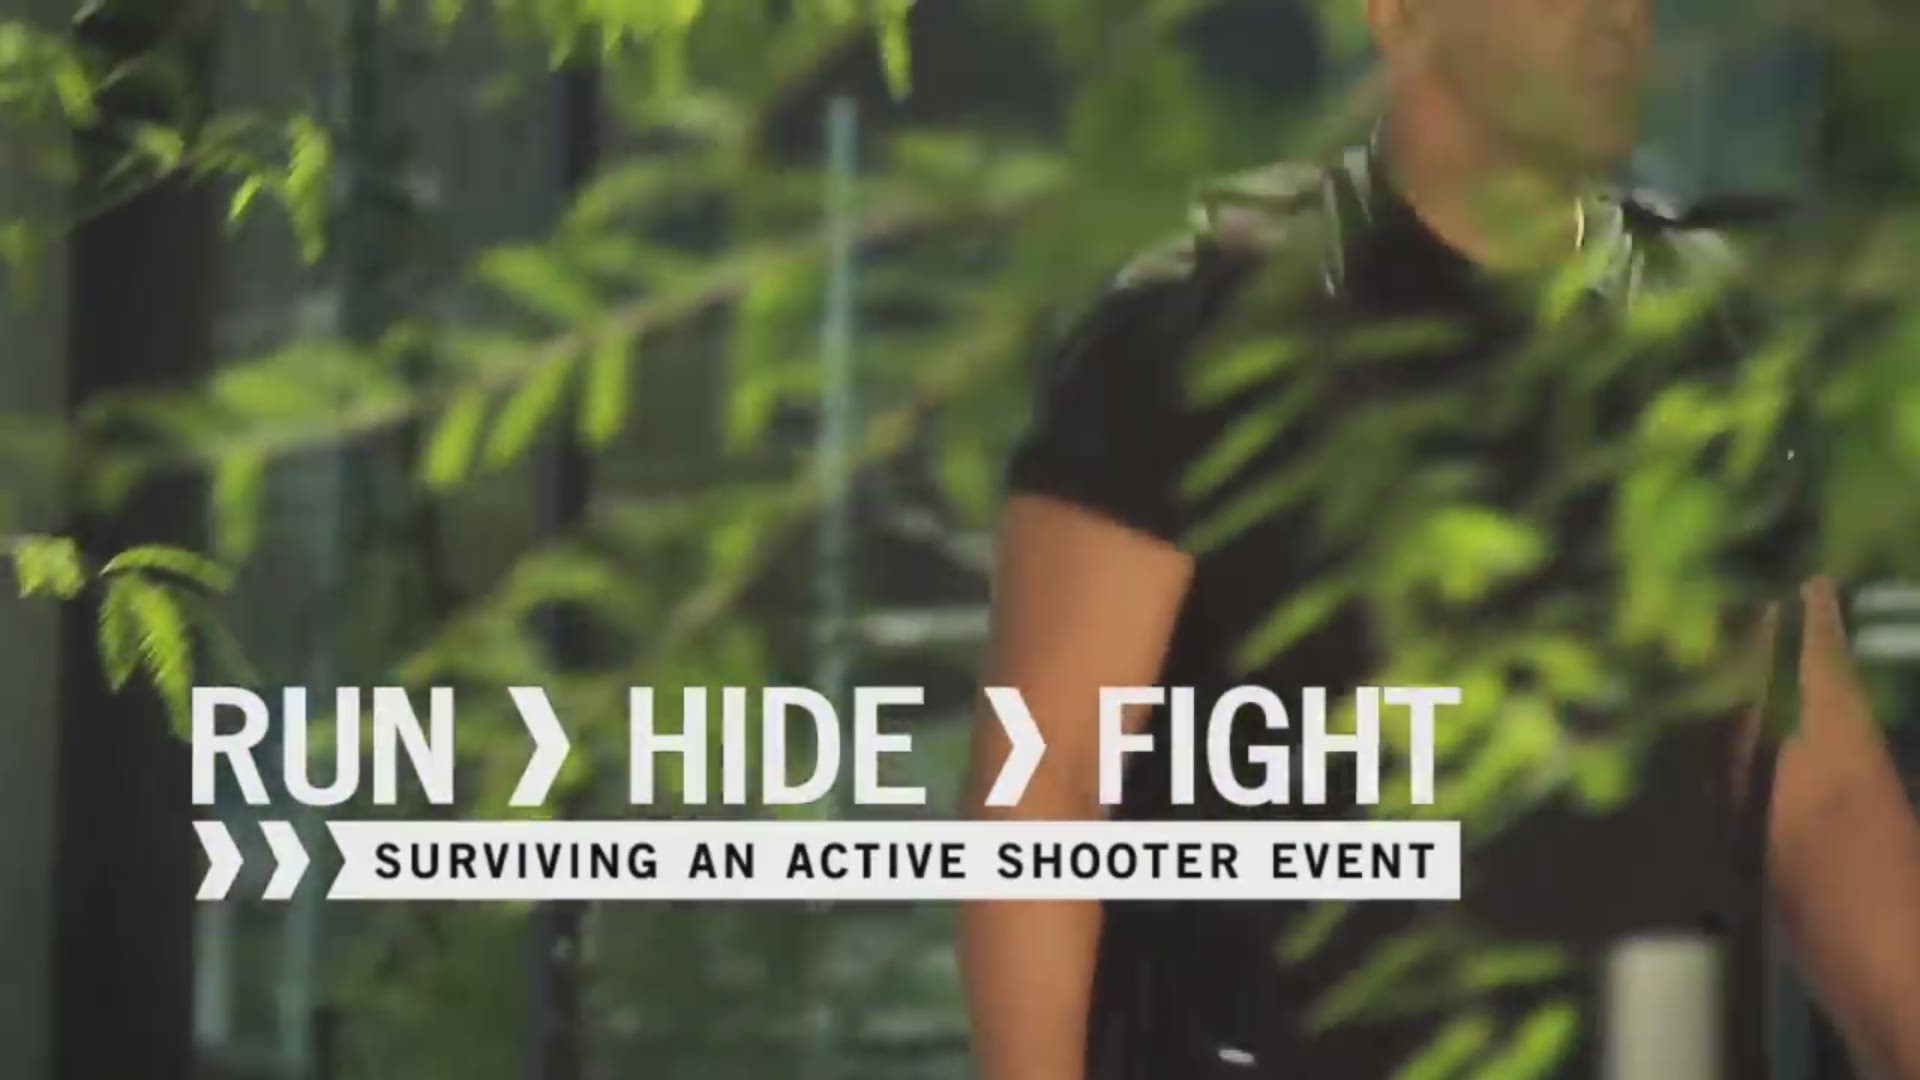 If you ever find yourself in the middle of an active shooter situation, your survival may depend on whether or not you have a plan.  It doesn't have to be complicated.  Three things that could make all the difference are: Run. Hide. Fight.